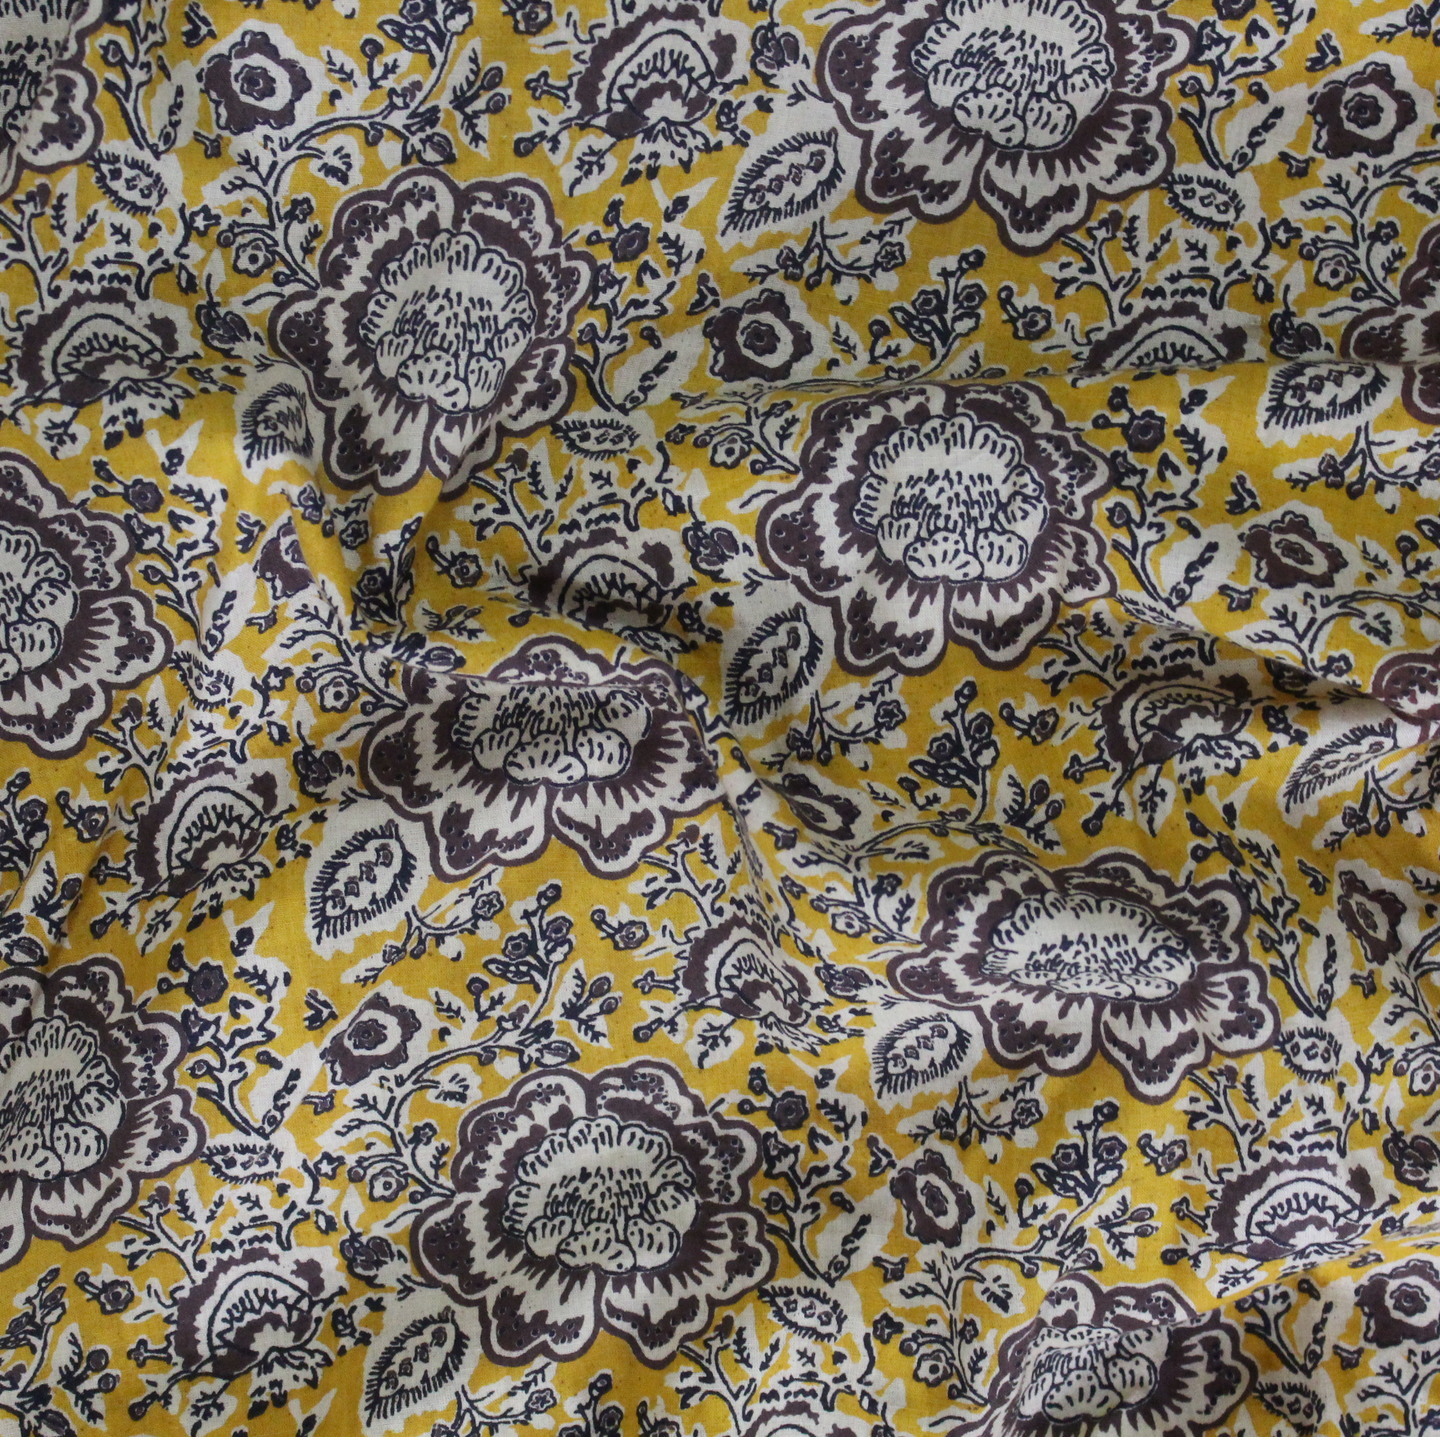 Yellow Floral Printed Fabric (Rs 150/Meter)